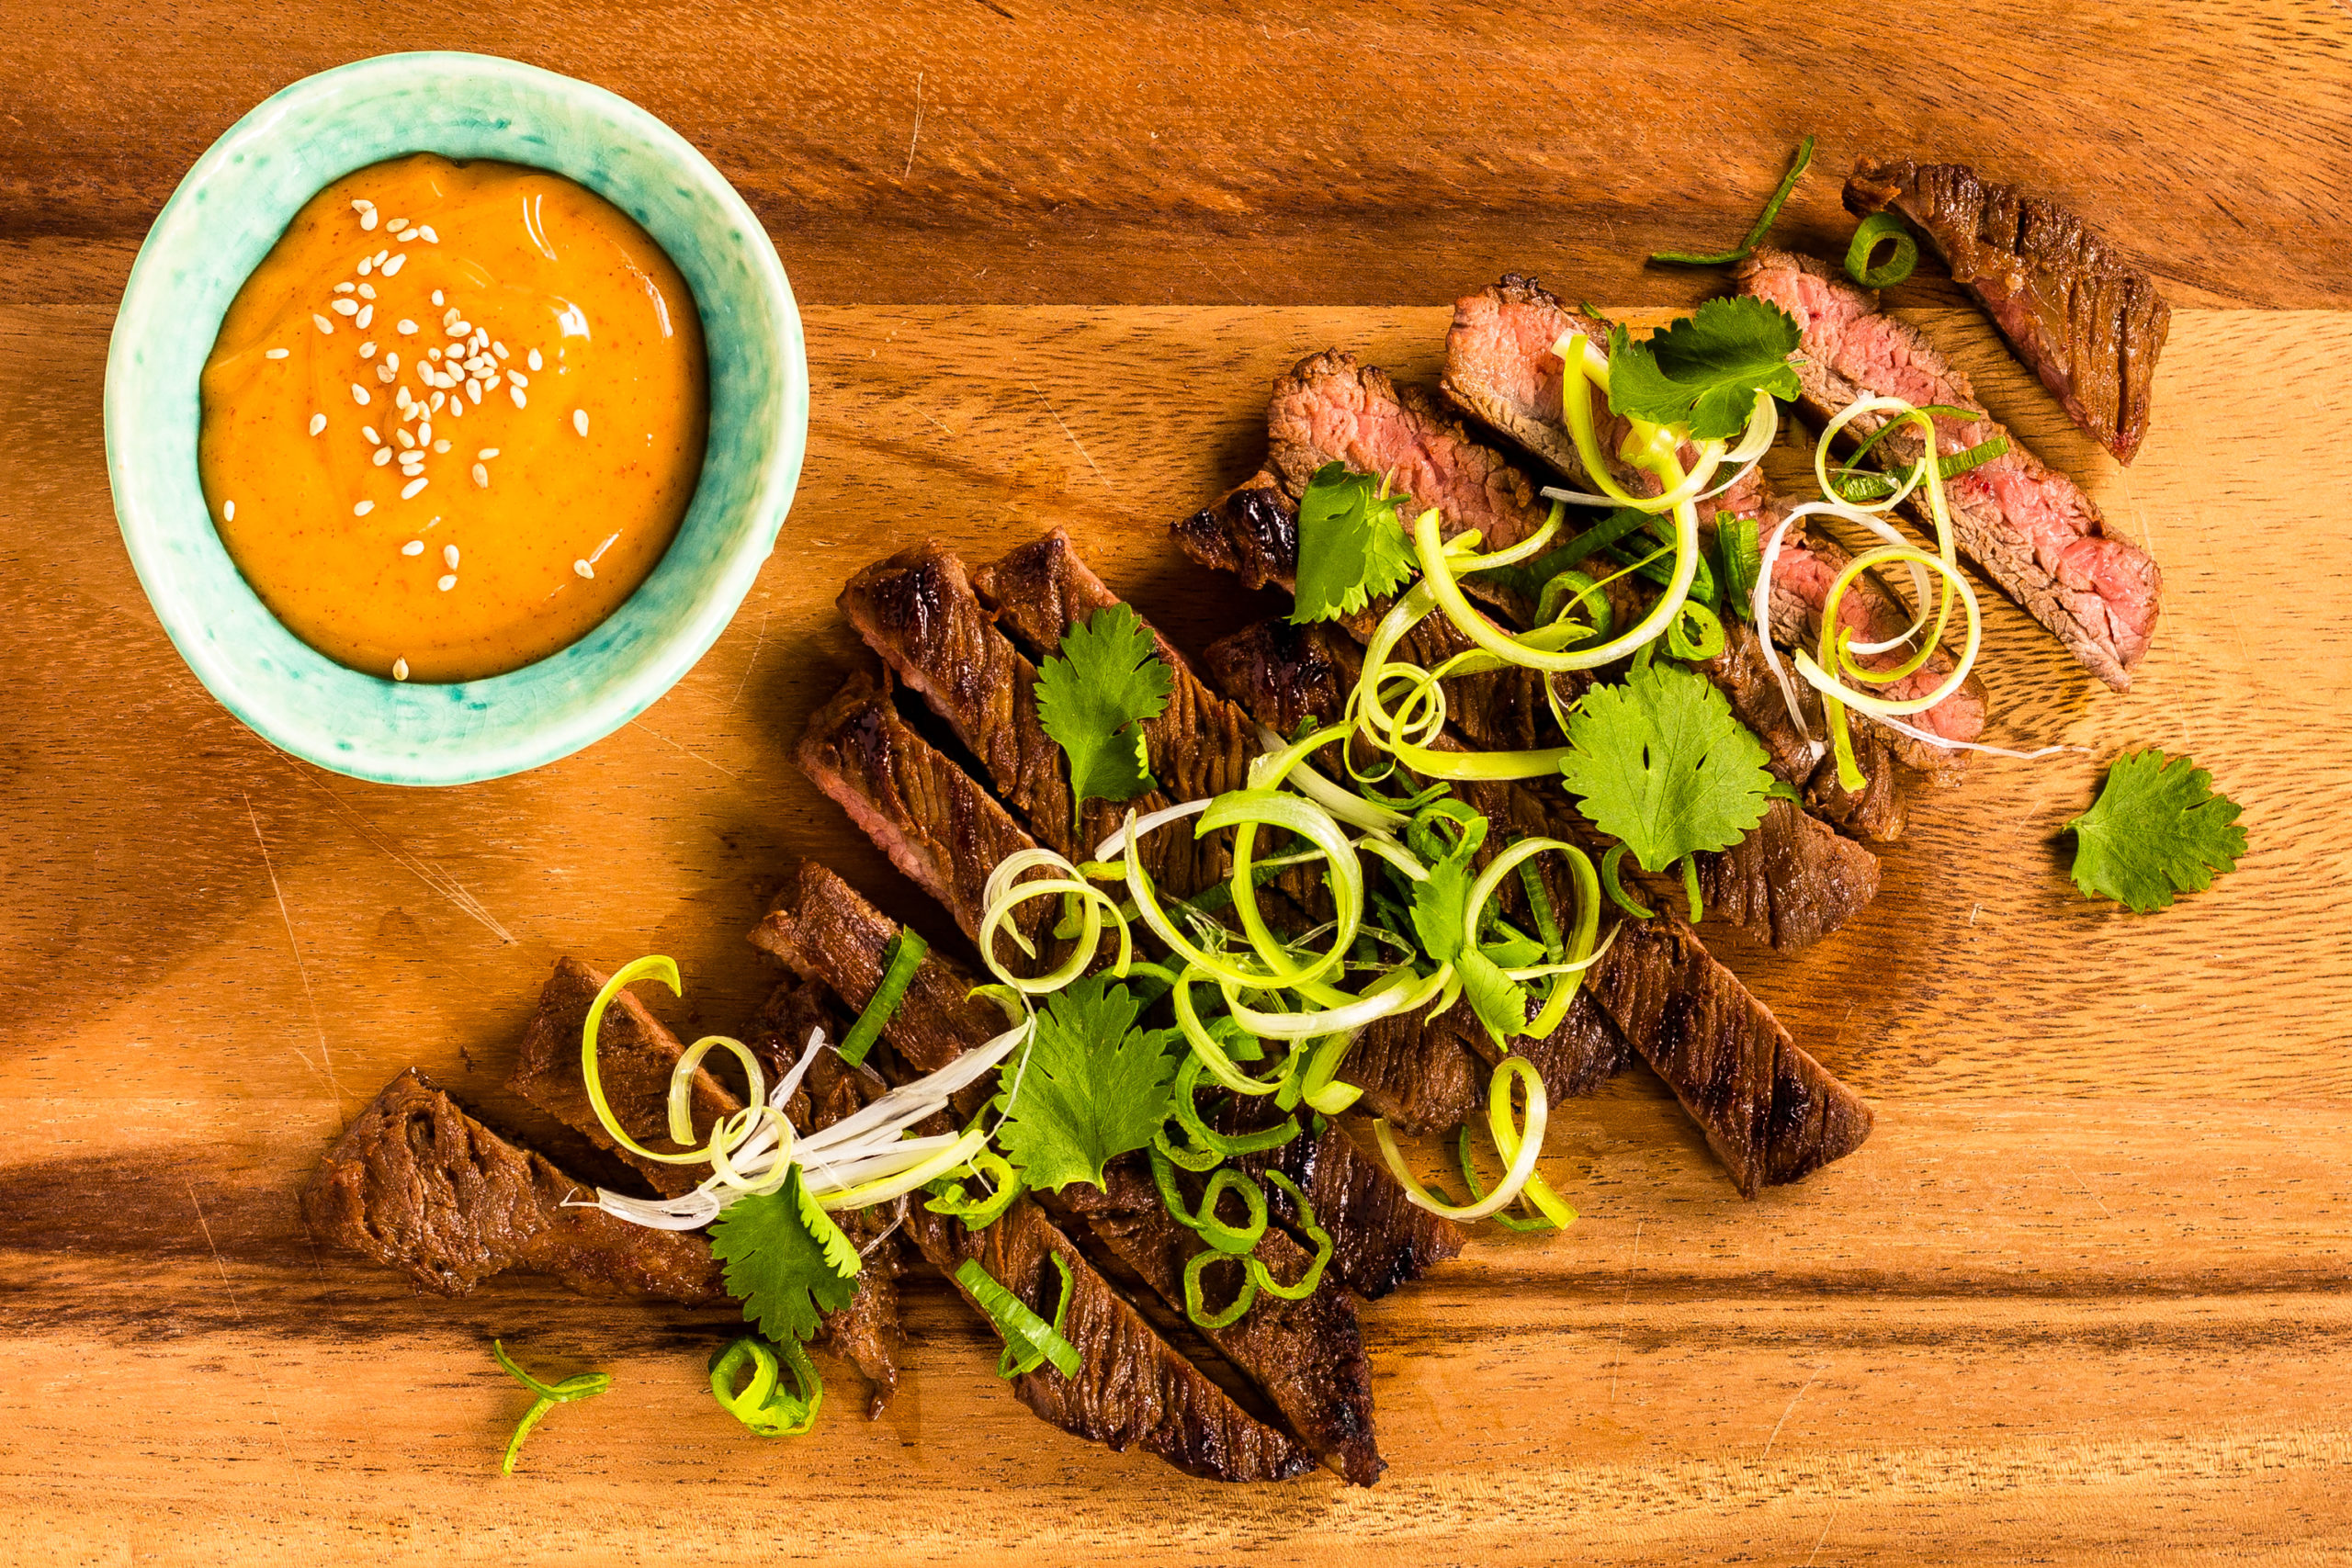 Korean-style barbecued skirt steak with gochujang mayo by Niamh Shields